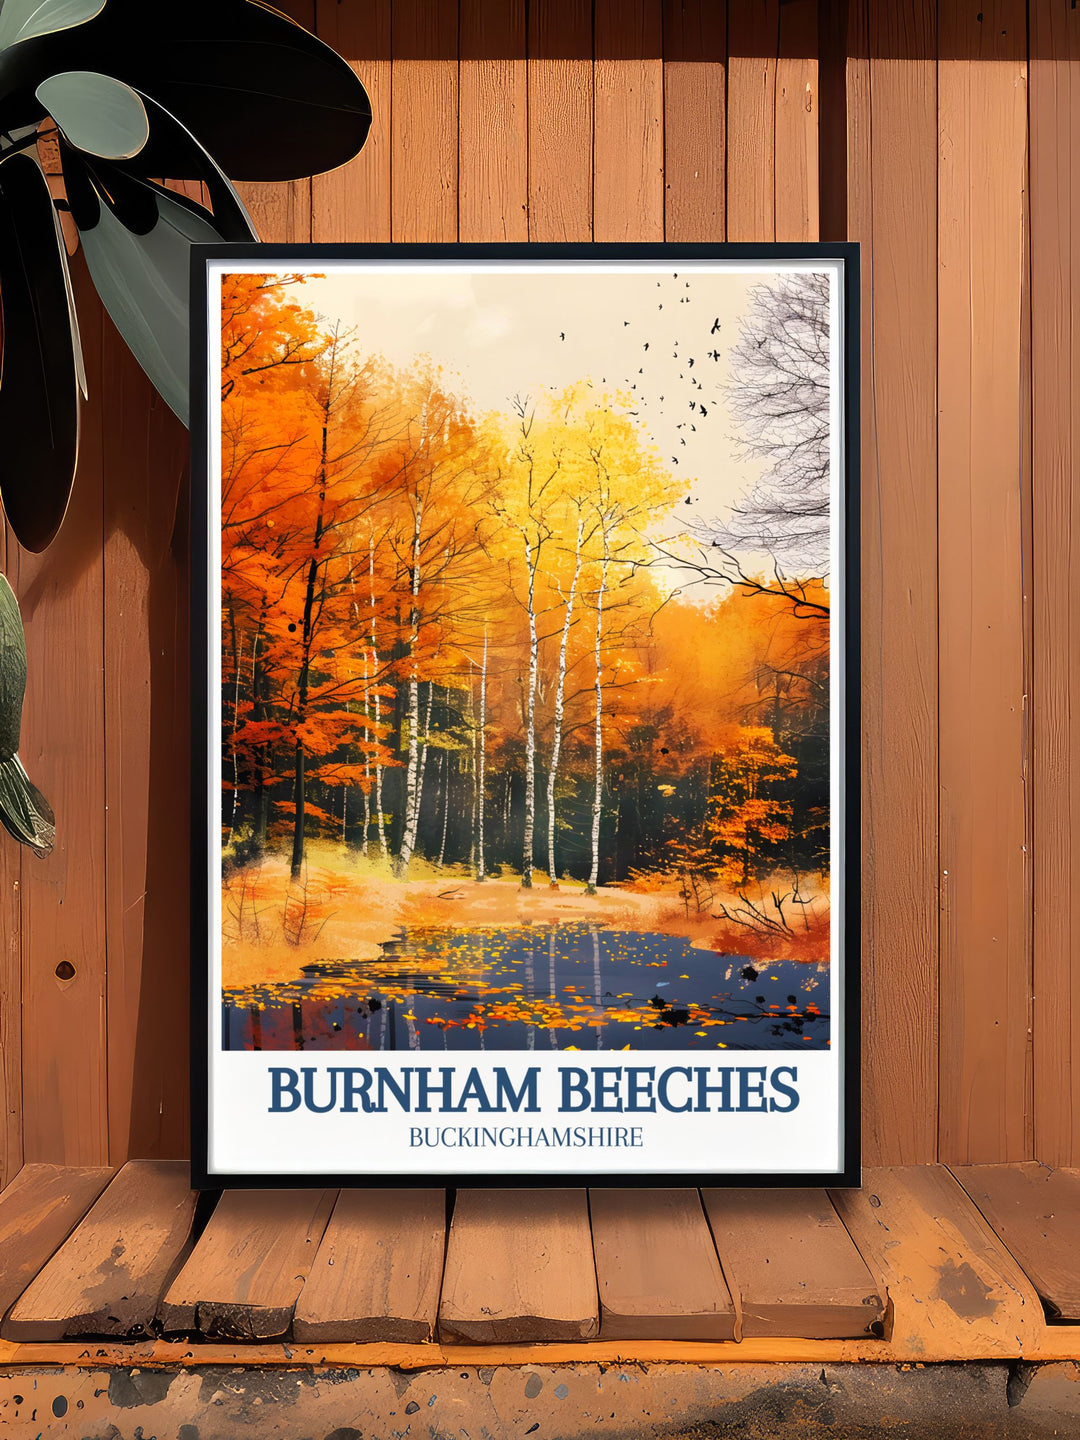 Captivating Burnham Beeches poster featuring the serene Upper Pond and the quaint village of Farnham Common, showcasing the beauty of the British countryside. Perfect for adding a touch of nature to your home decor.